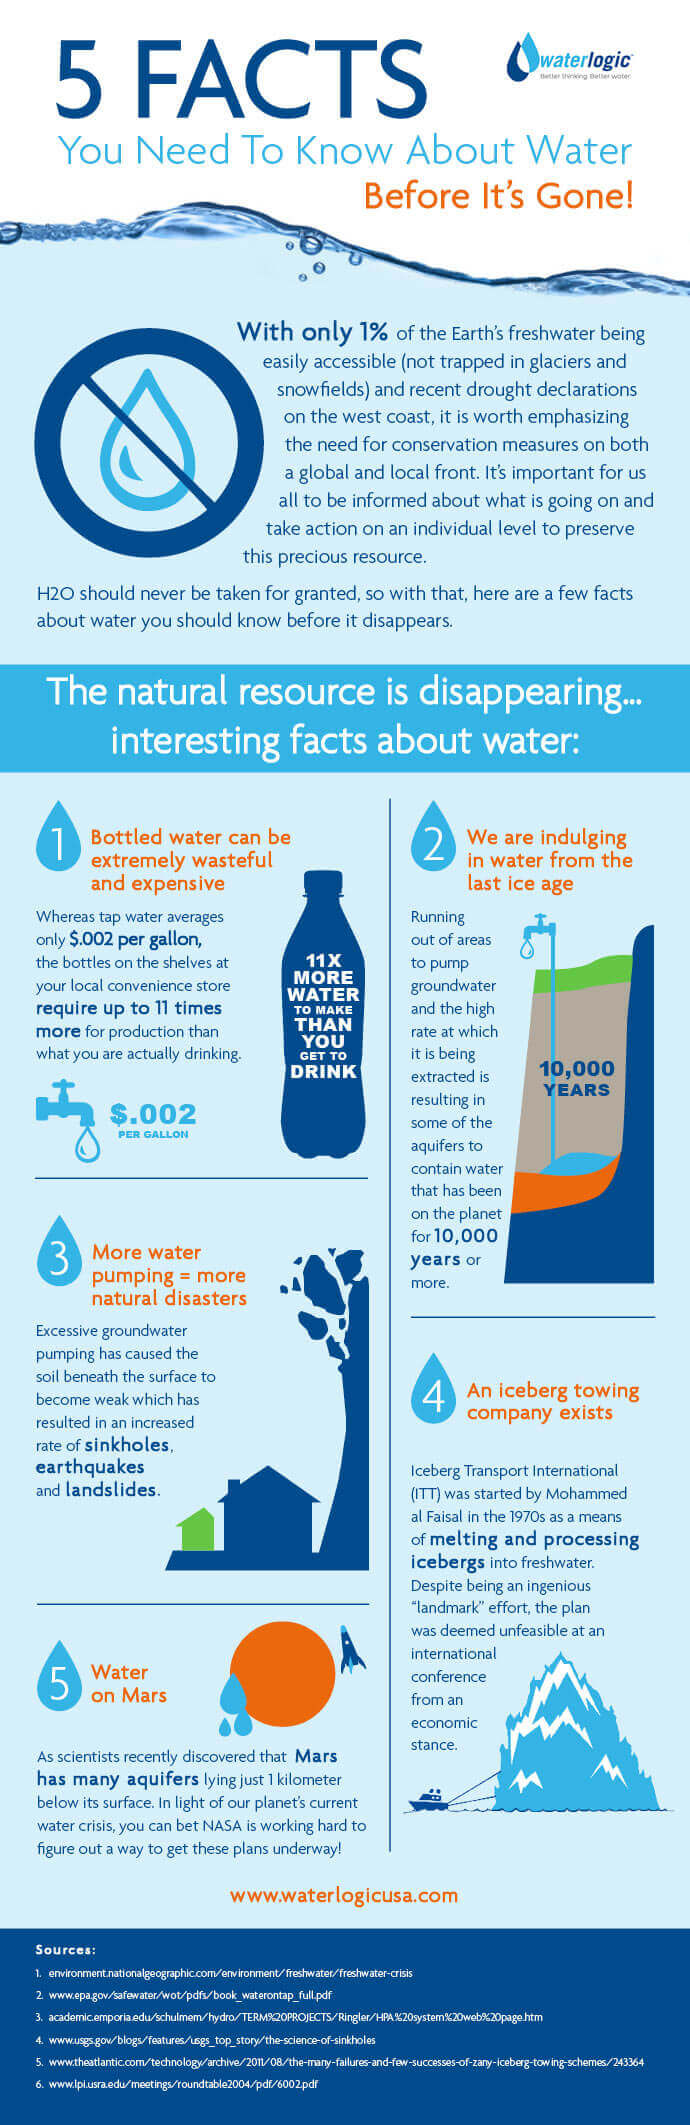 5 facts about water